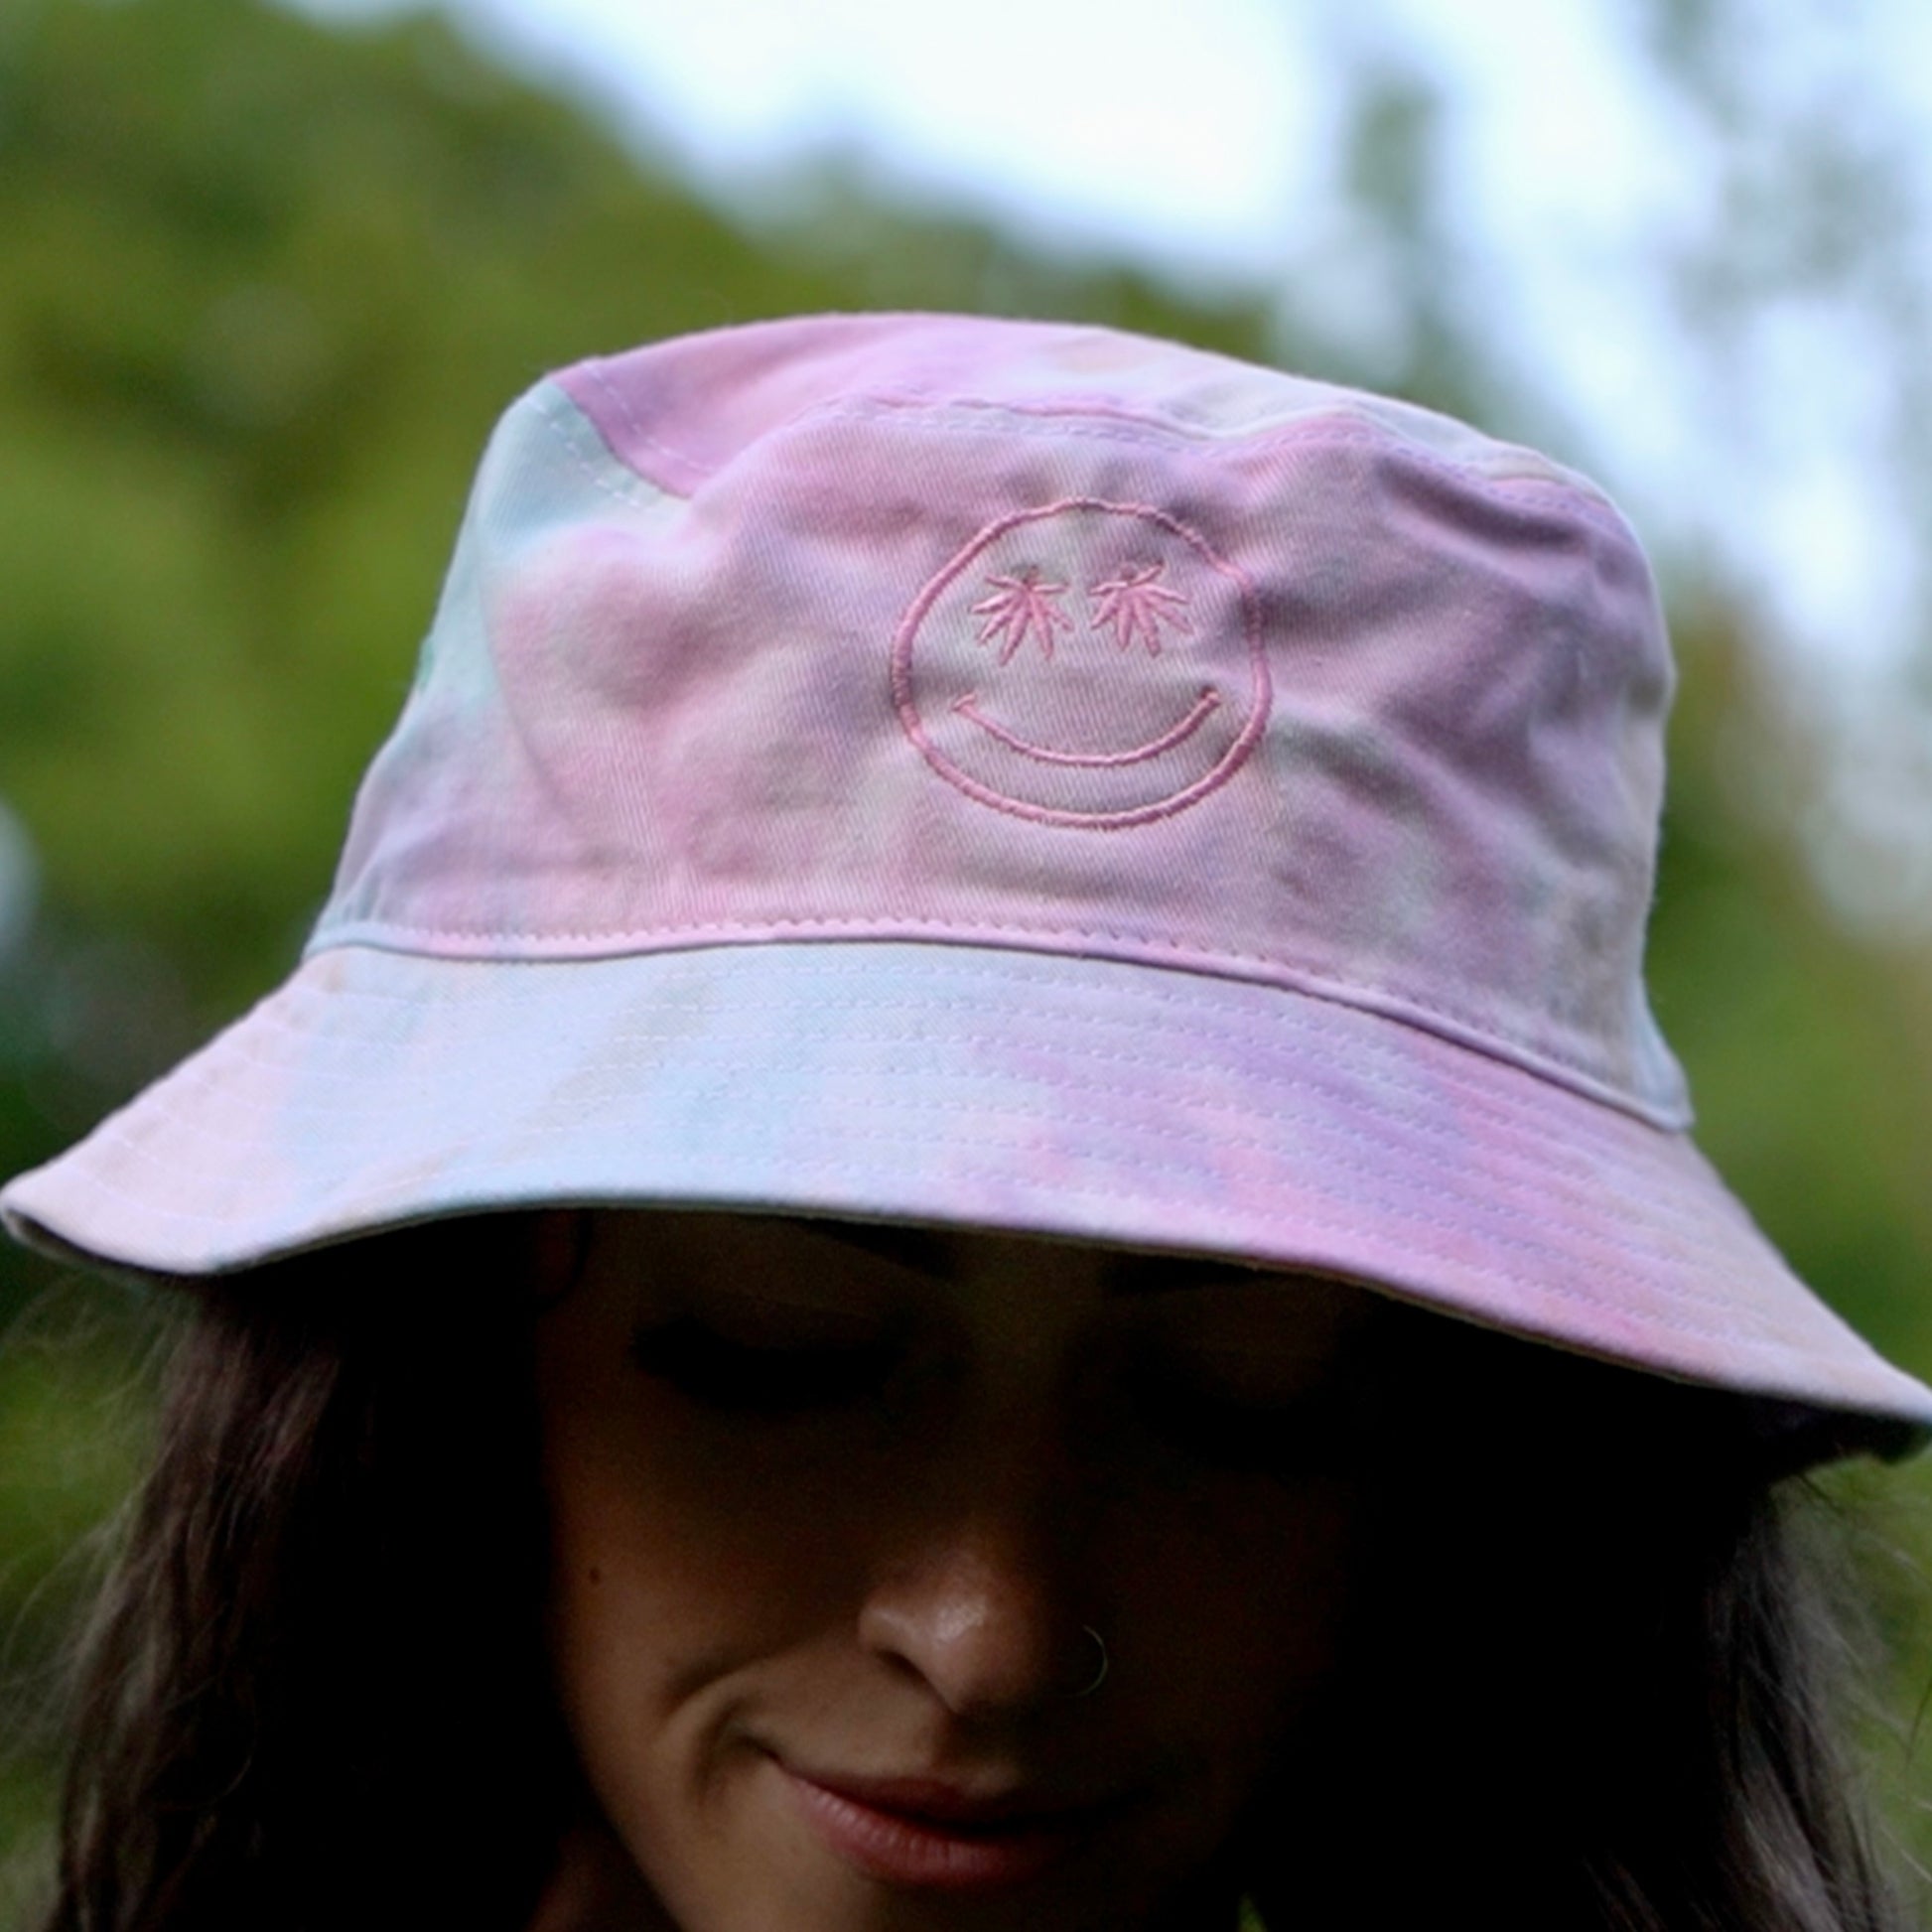 HSYZZY Bucket Hat Unisex 100% Cotton Smile Face Embroidery India